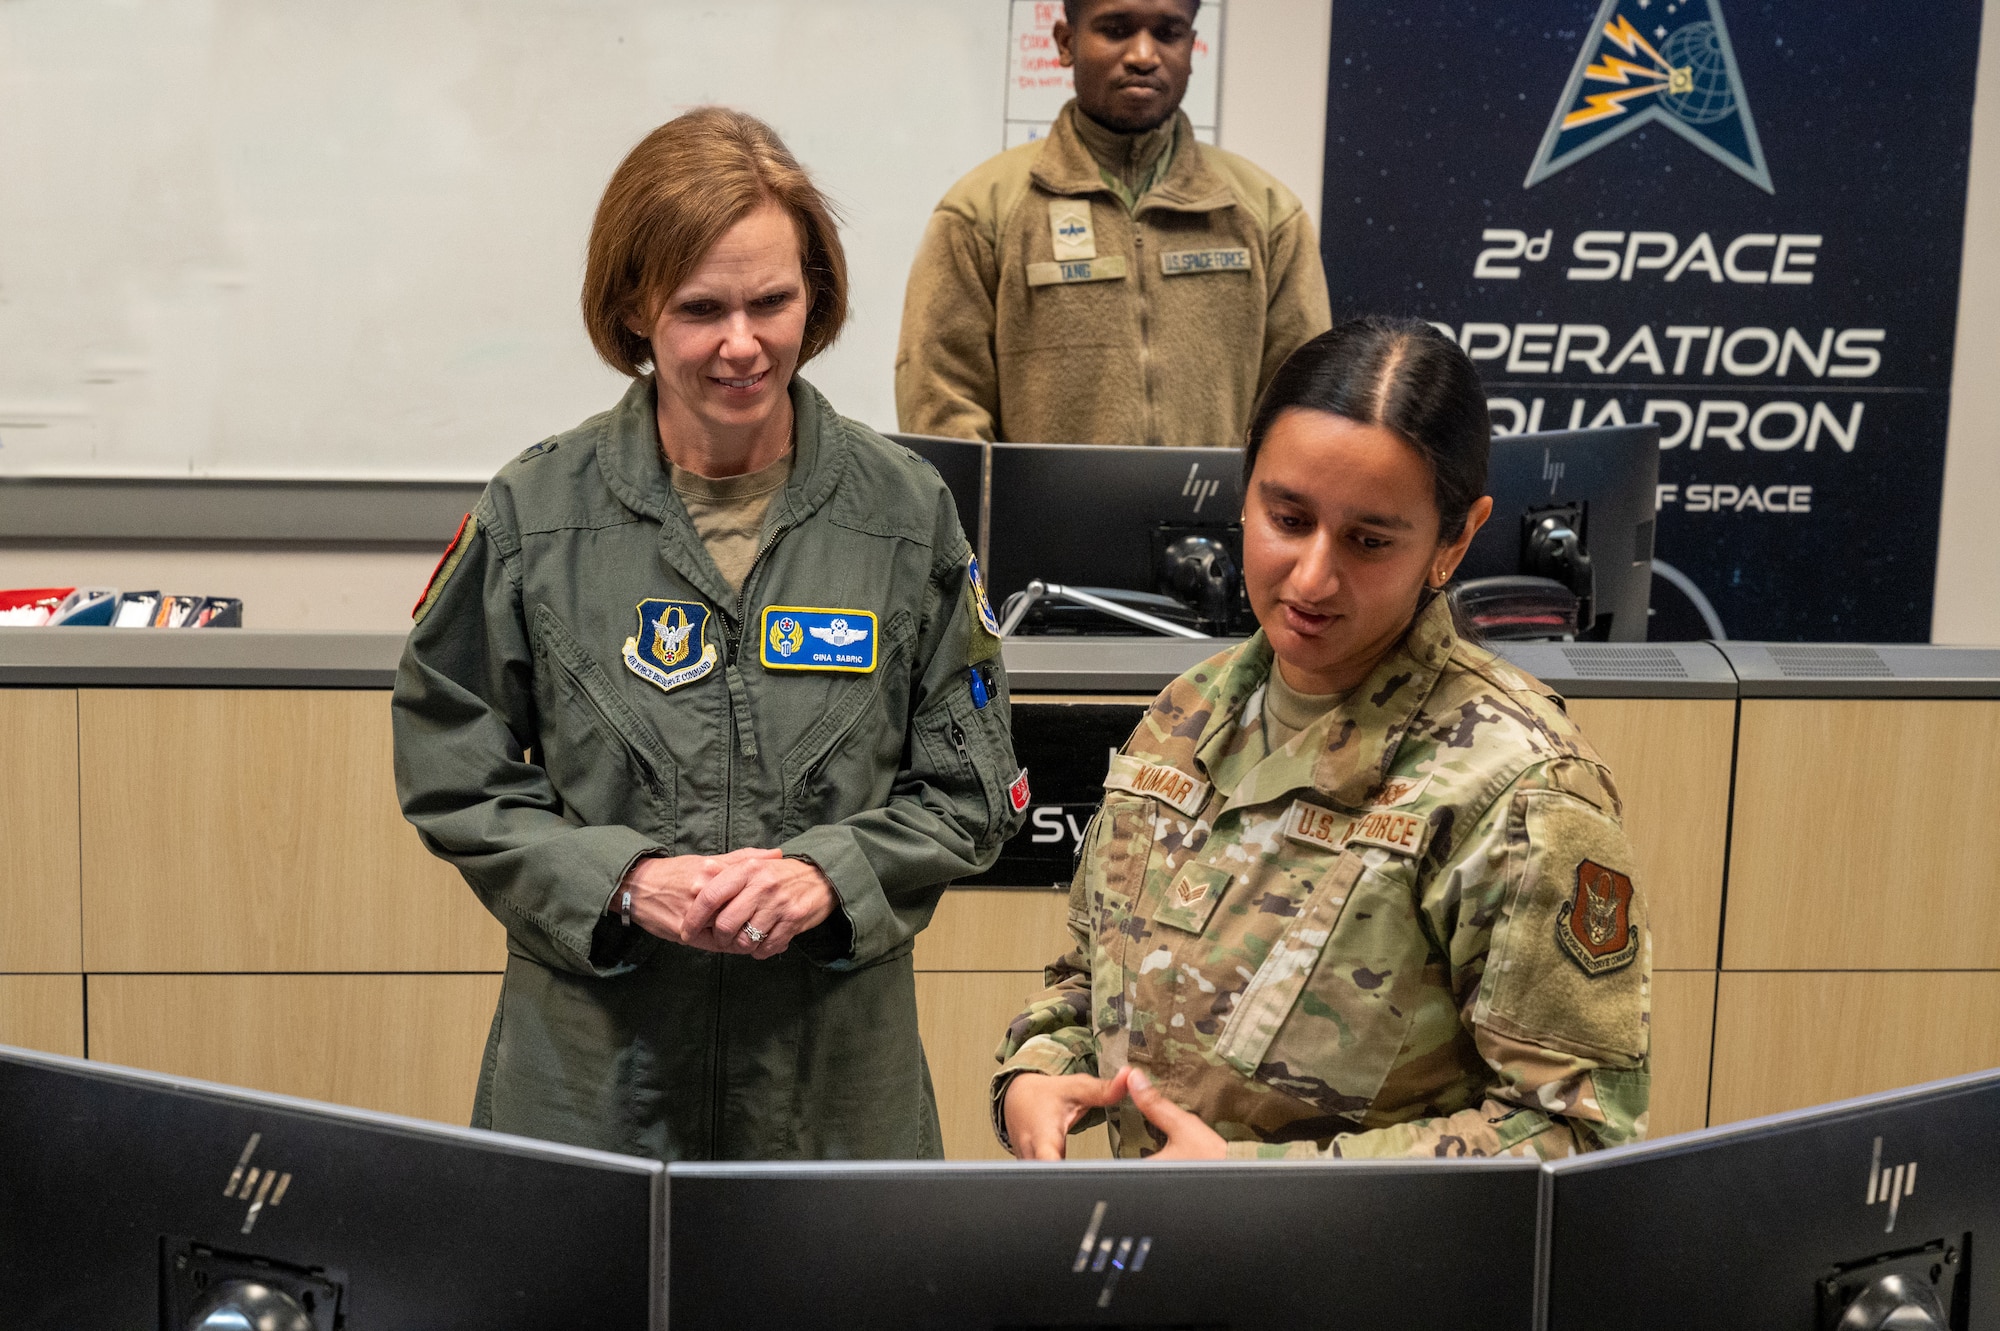 Two people in U.S. Air Force uniforms looking at computer screens.